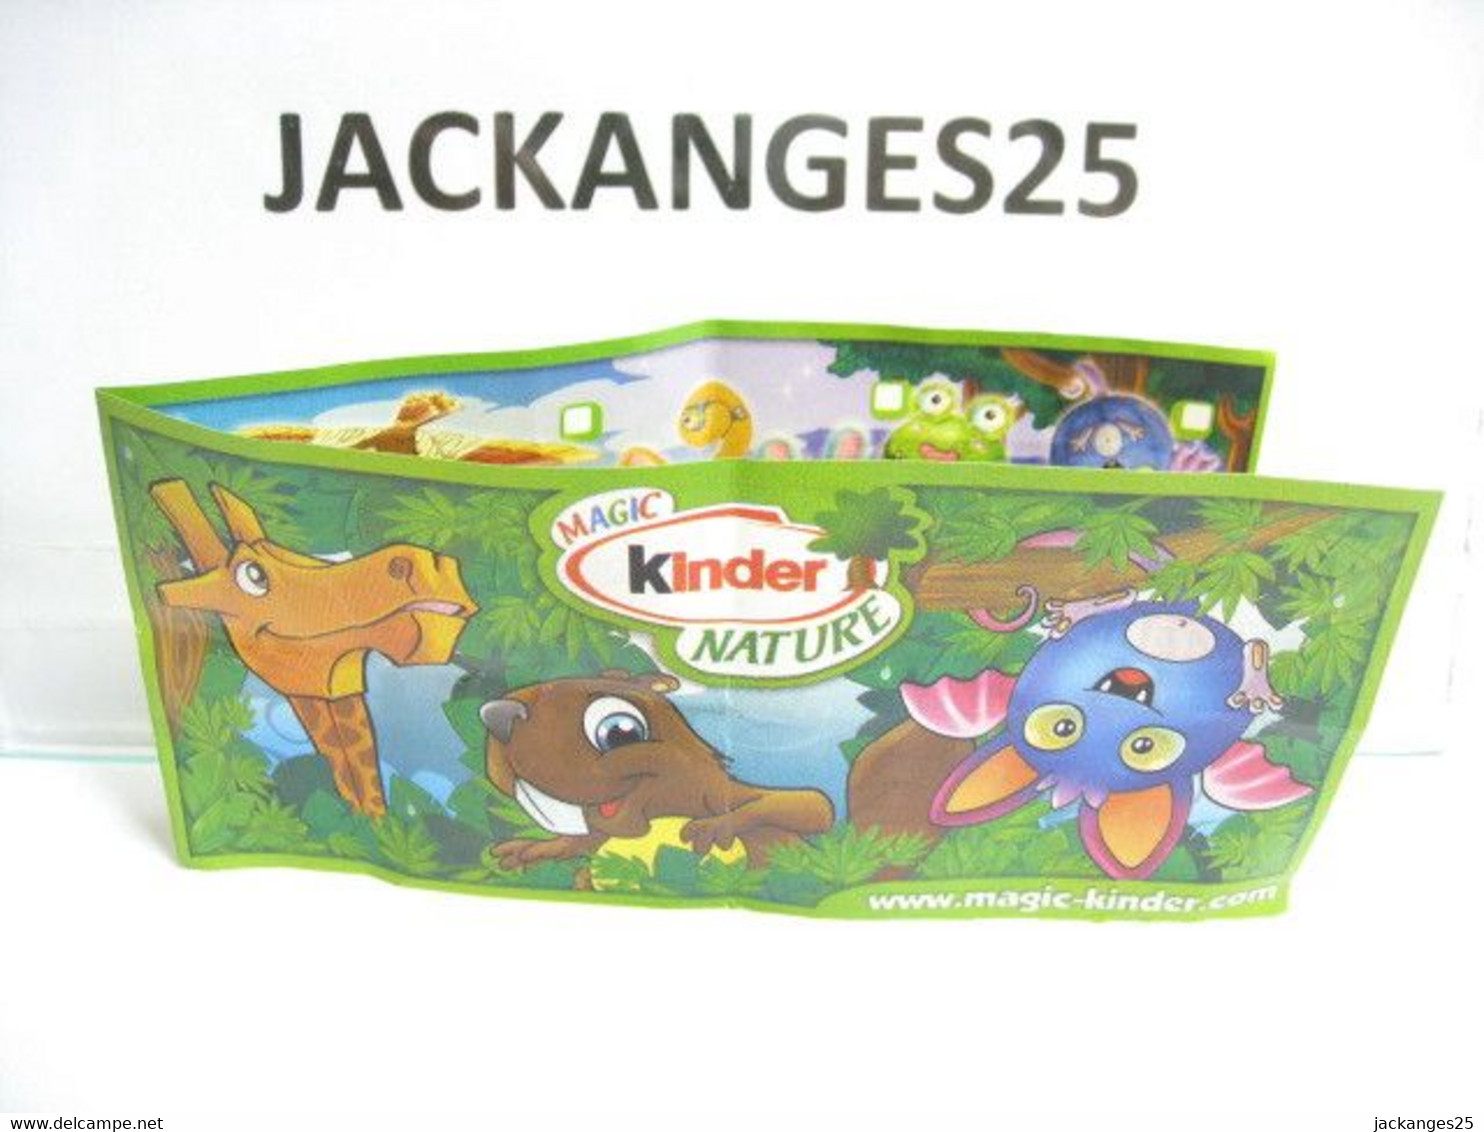 KINDER MPG UN 19 b TAUPE ANIMAUX NATURE NATOONS TIERE 2010  2011 + BPZ b NATURE